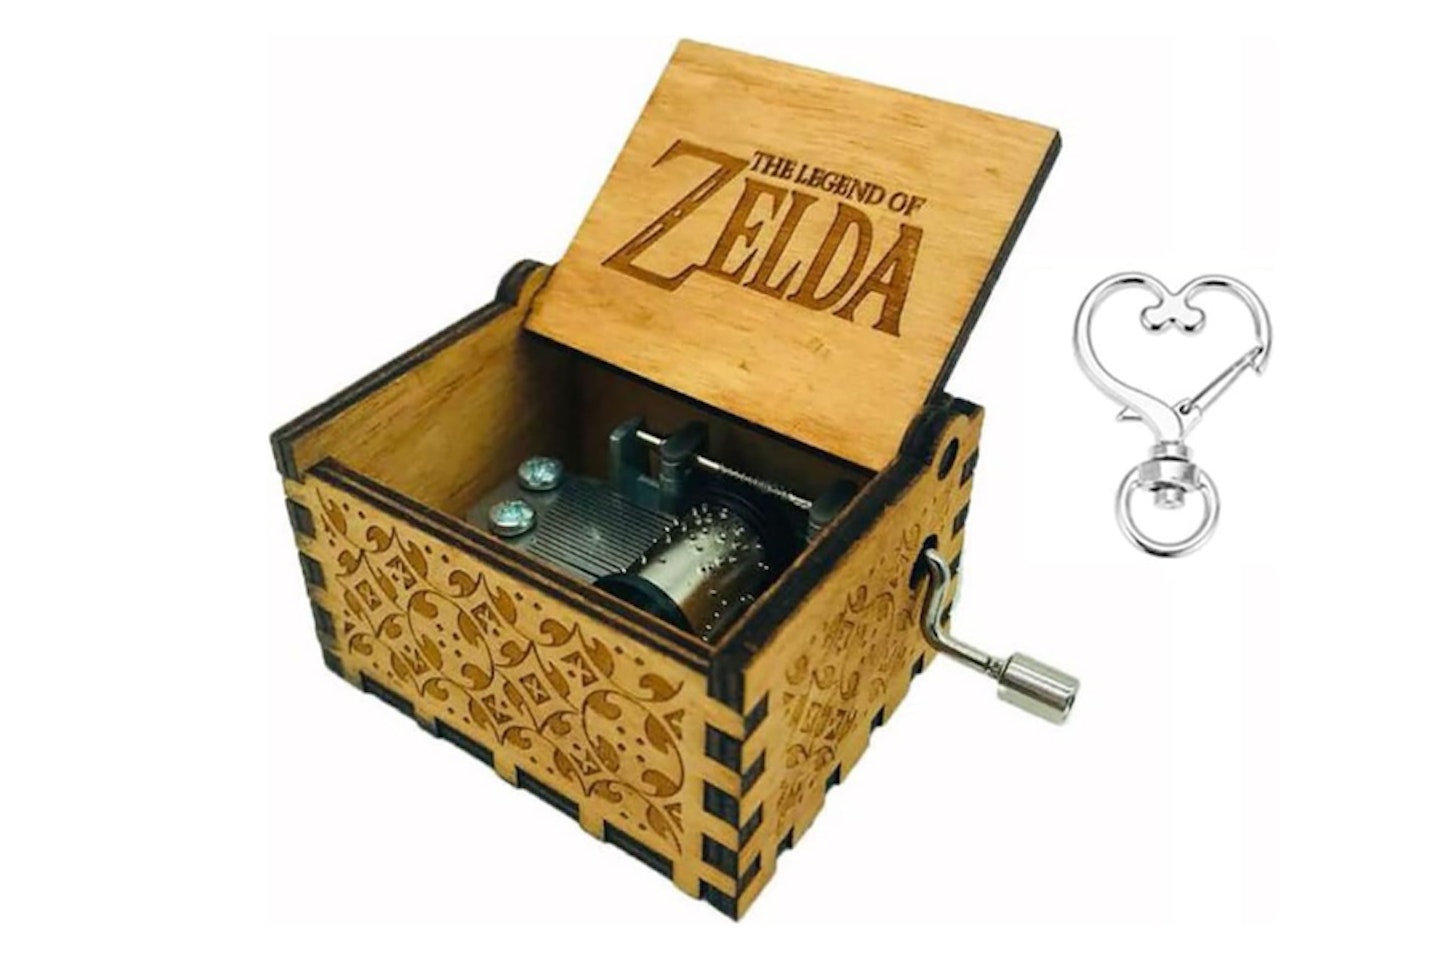 Cuzit The Legend of Zelda Movie Theme Antique Carved Music Box - one of the best gifts for gamers